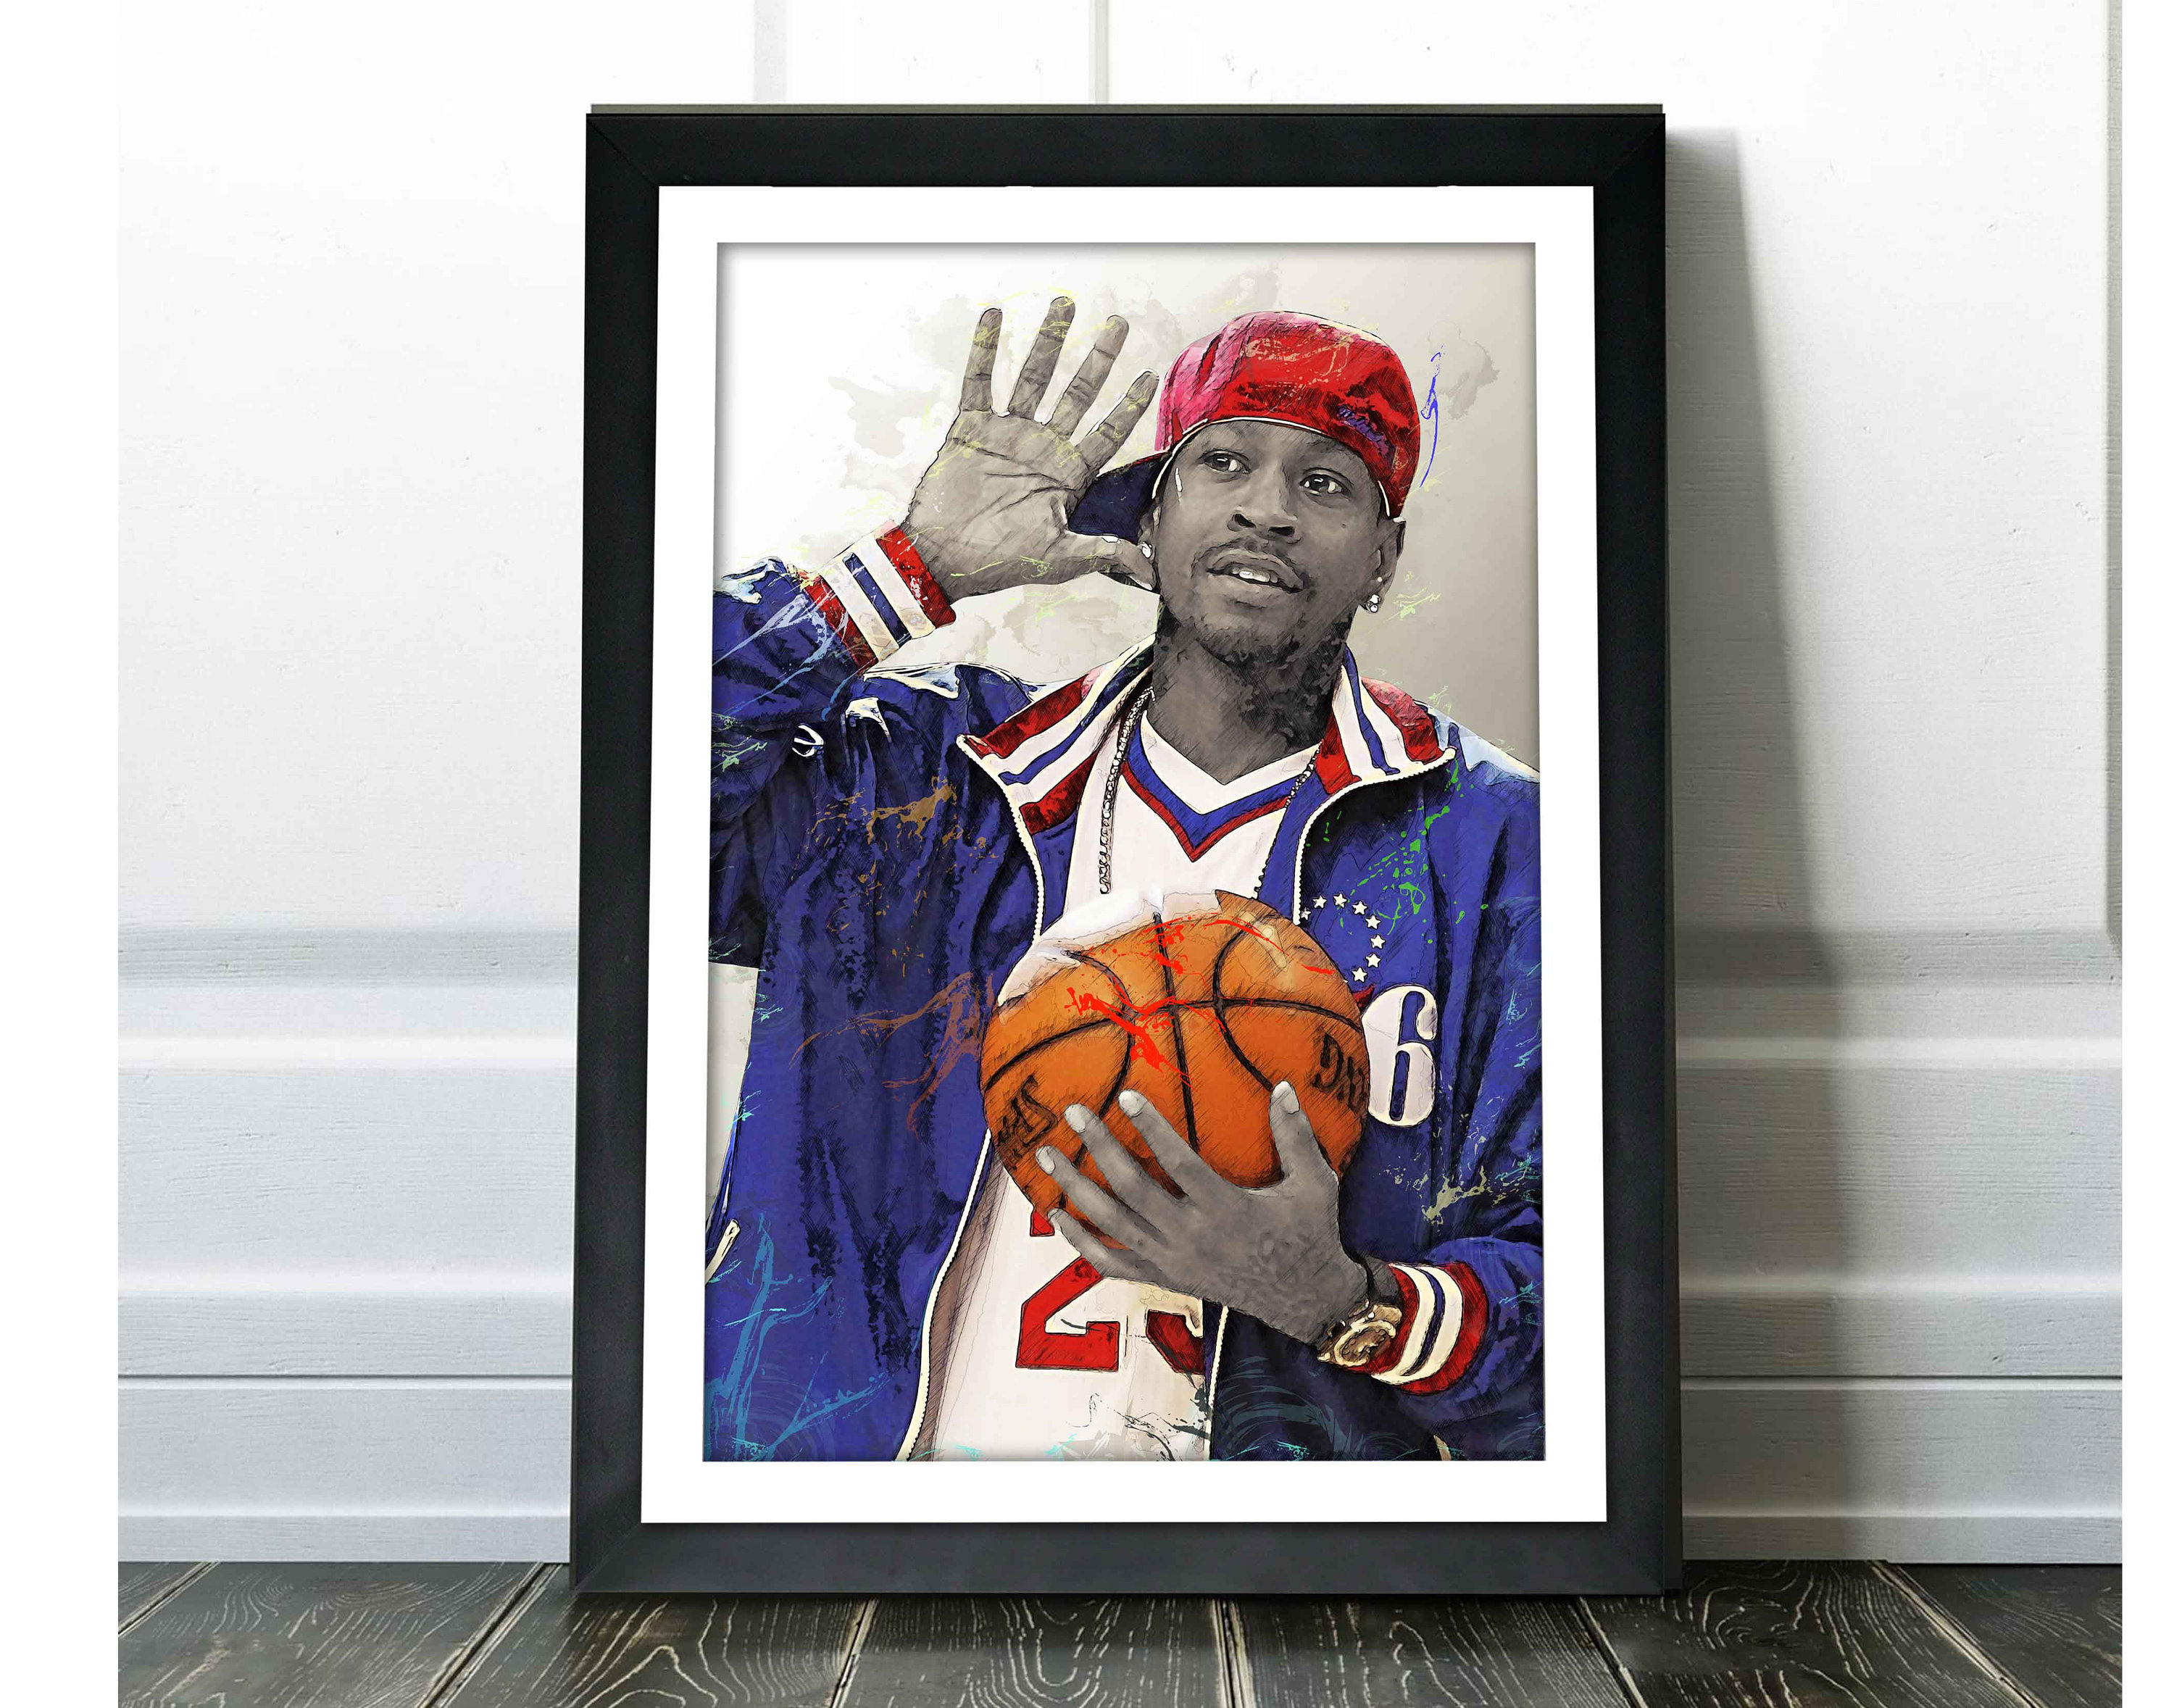 Allen Iverson Posters Basketball Wallpaper Canvas Wall Art Decor Paintings  Picture for Home Living Room Decoration Unframe:24×36inch(60×90cm)